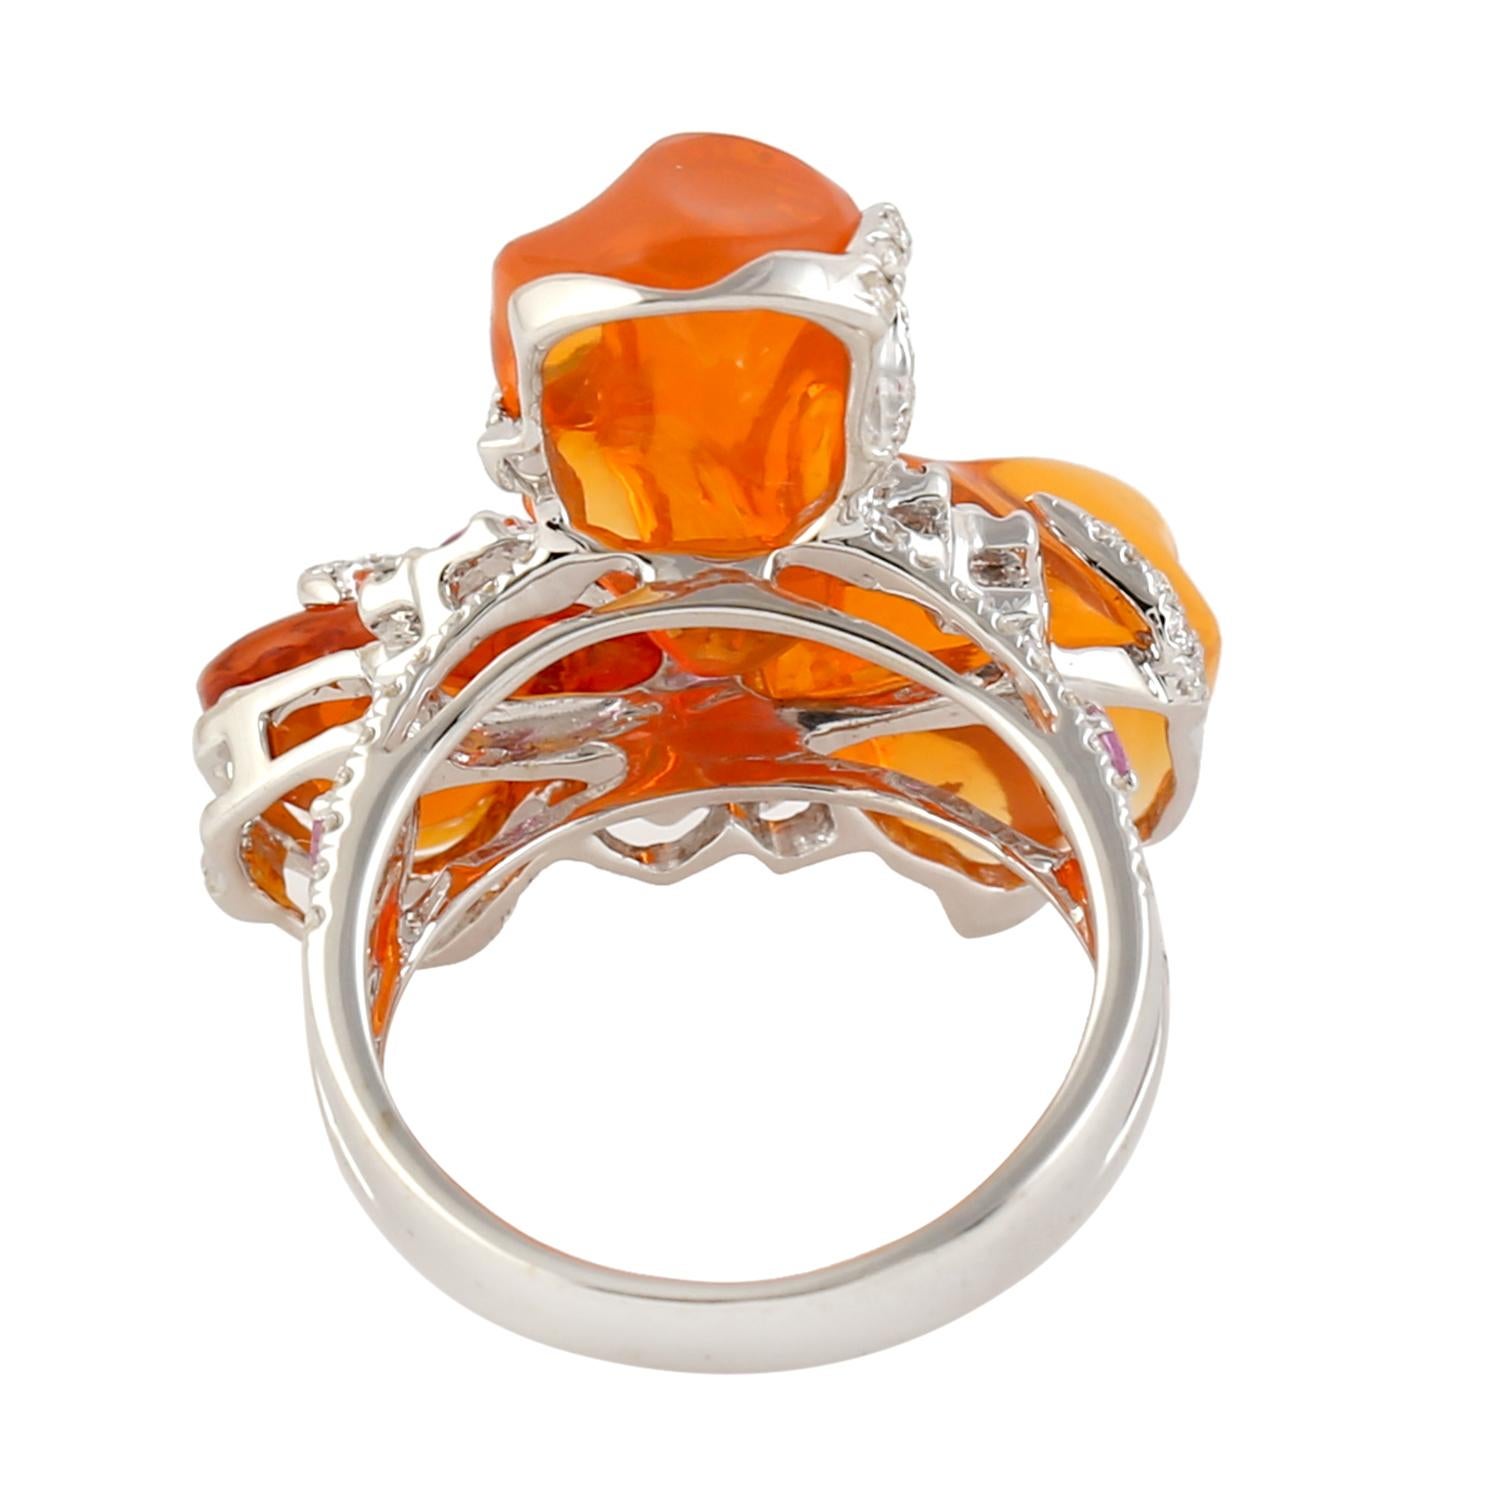 Contemporary 3 Stone Fire Opal Ring Equipped With Sapphire & Diamonds In 18k White Gold For Sale